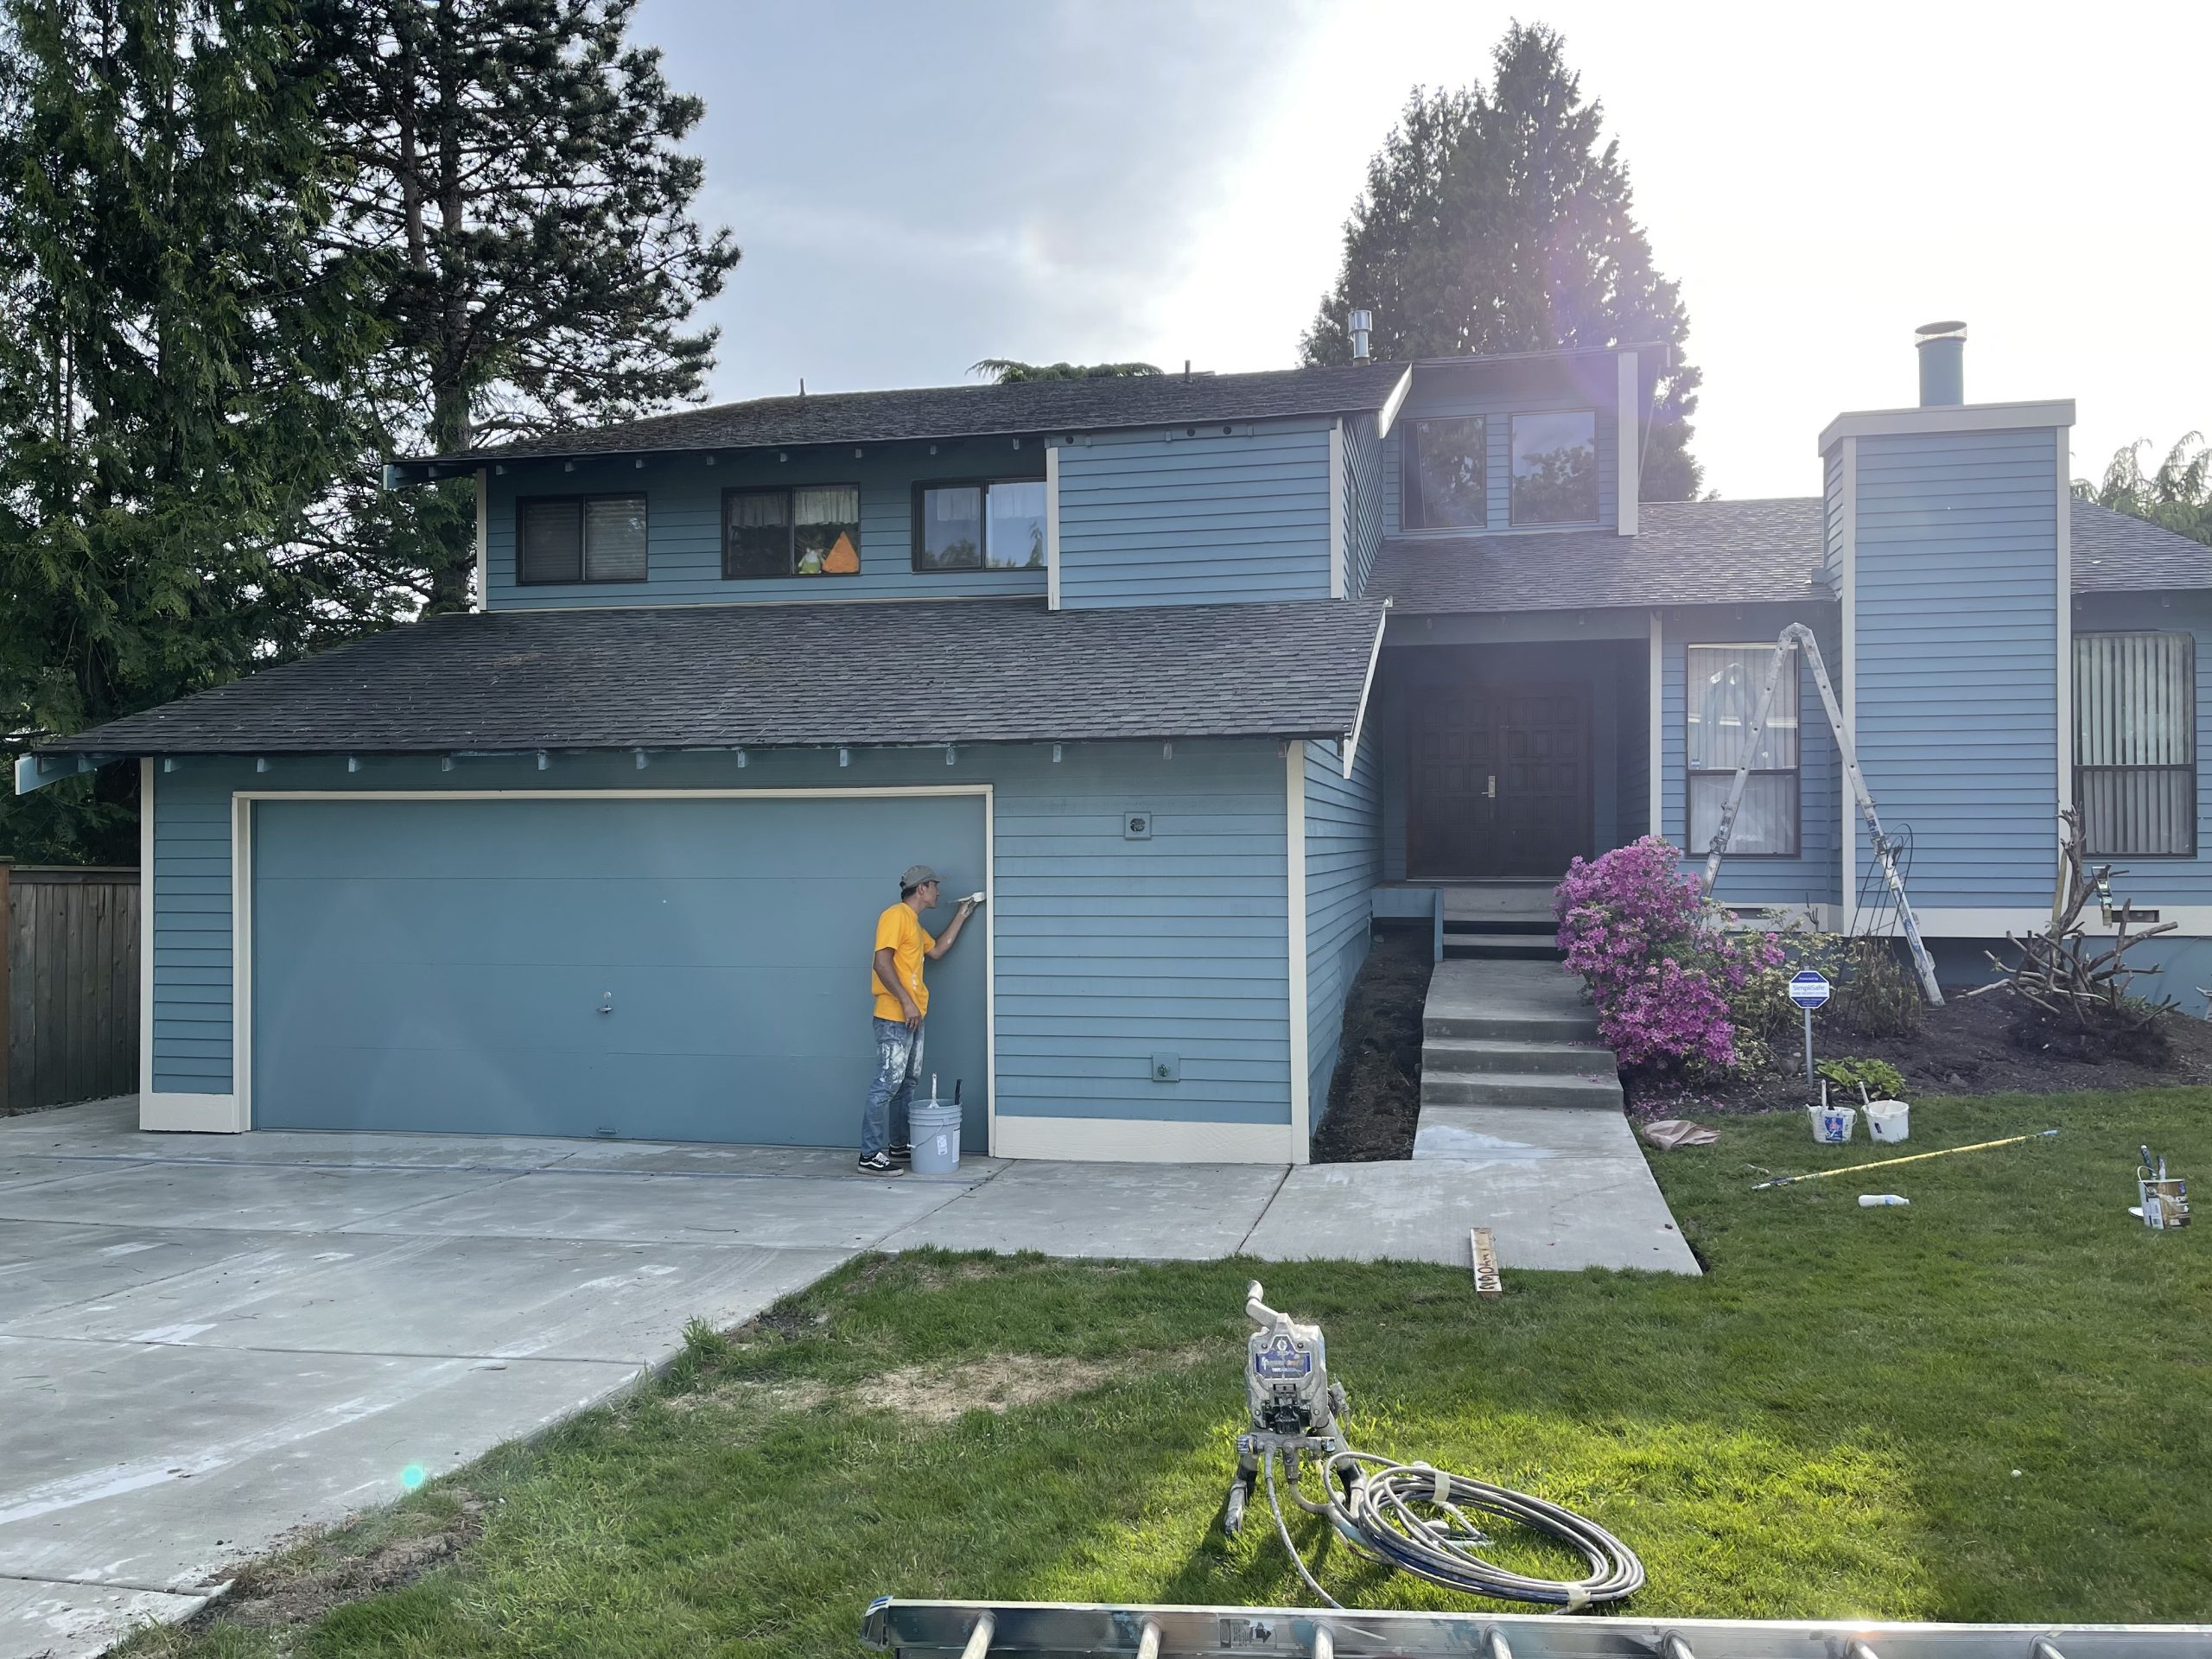 Final Result of Exterior Paint Change - yellow to green